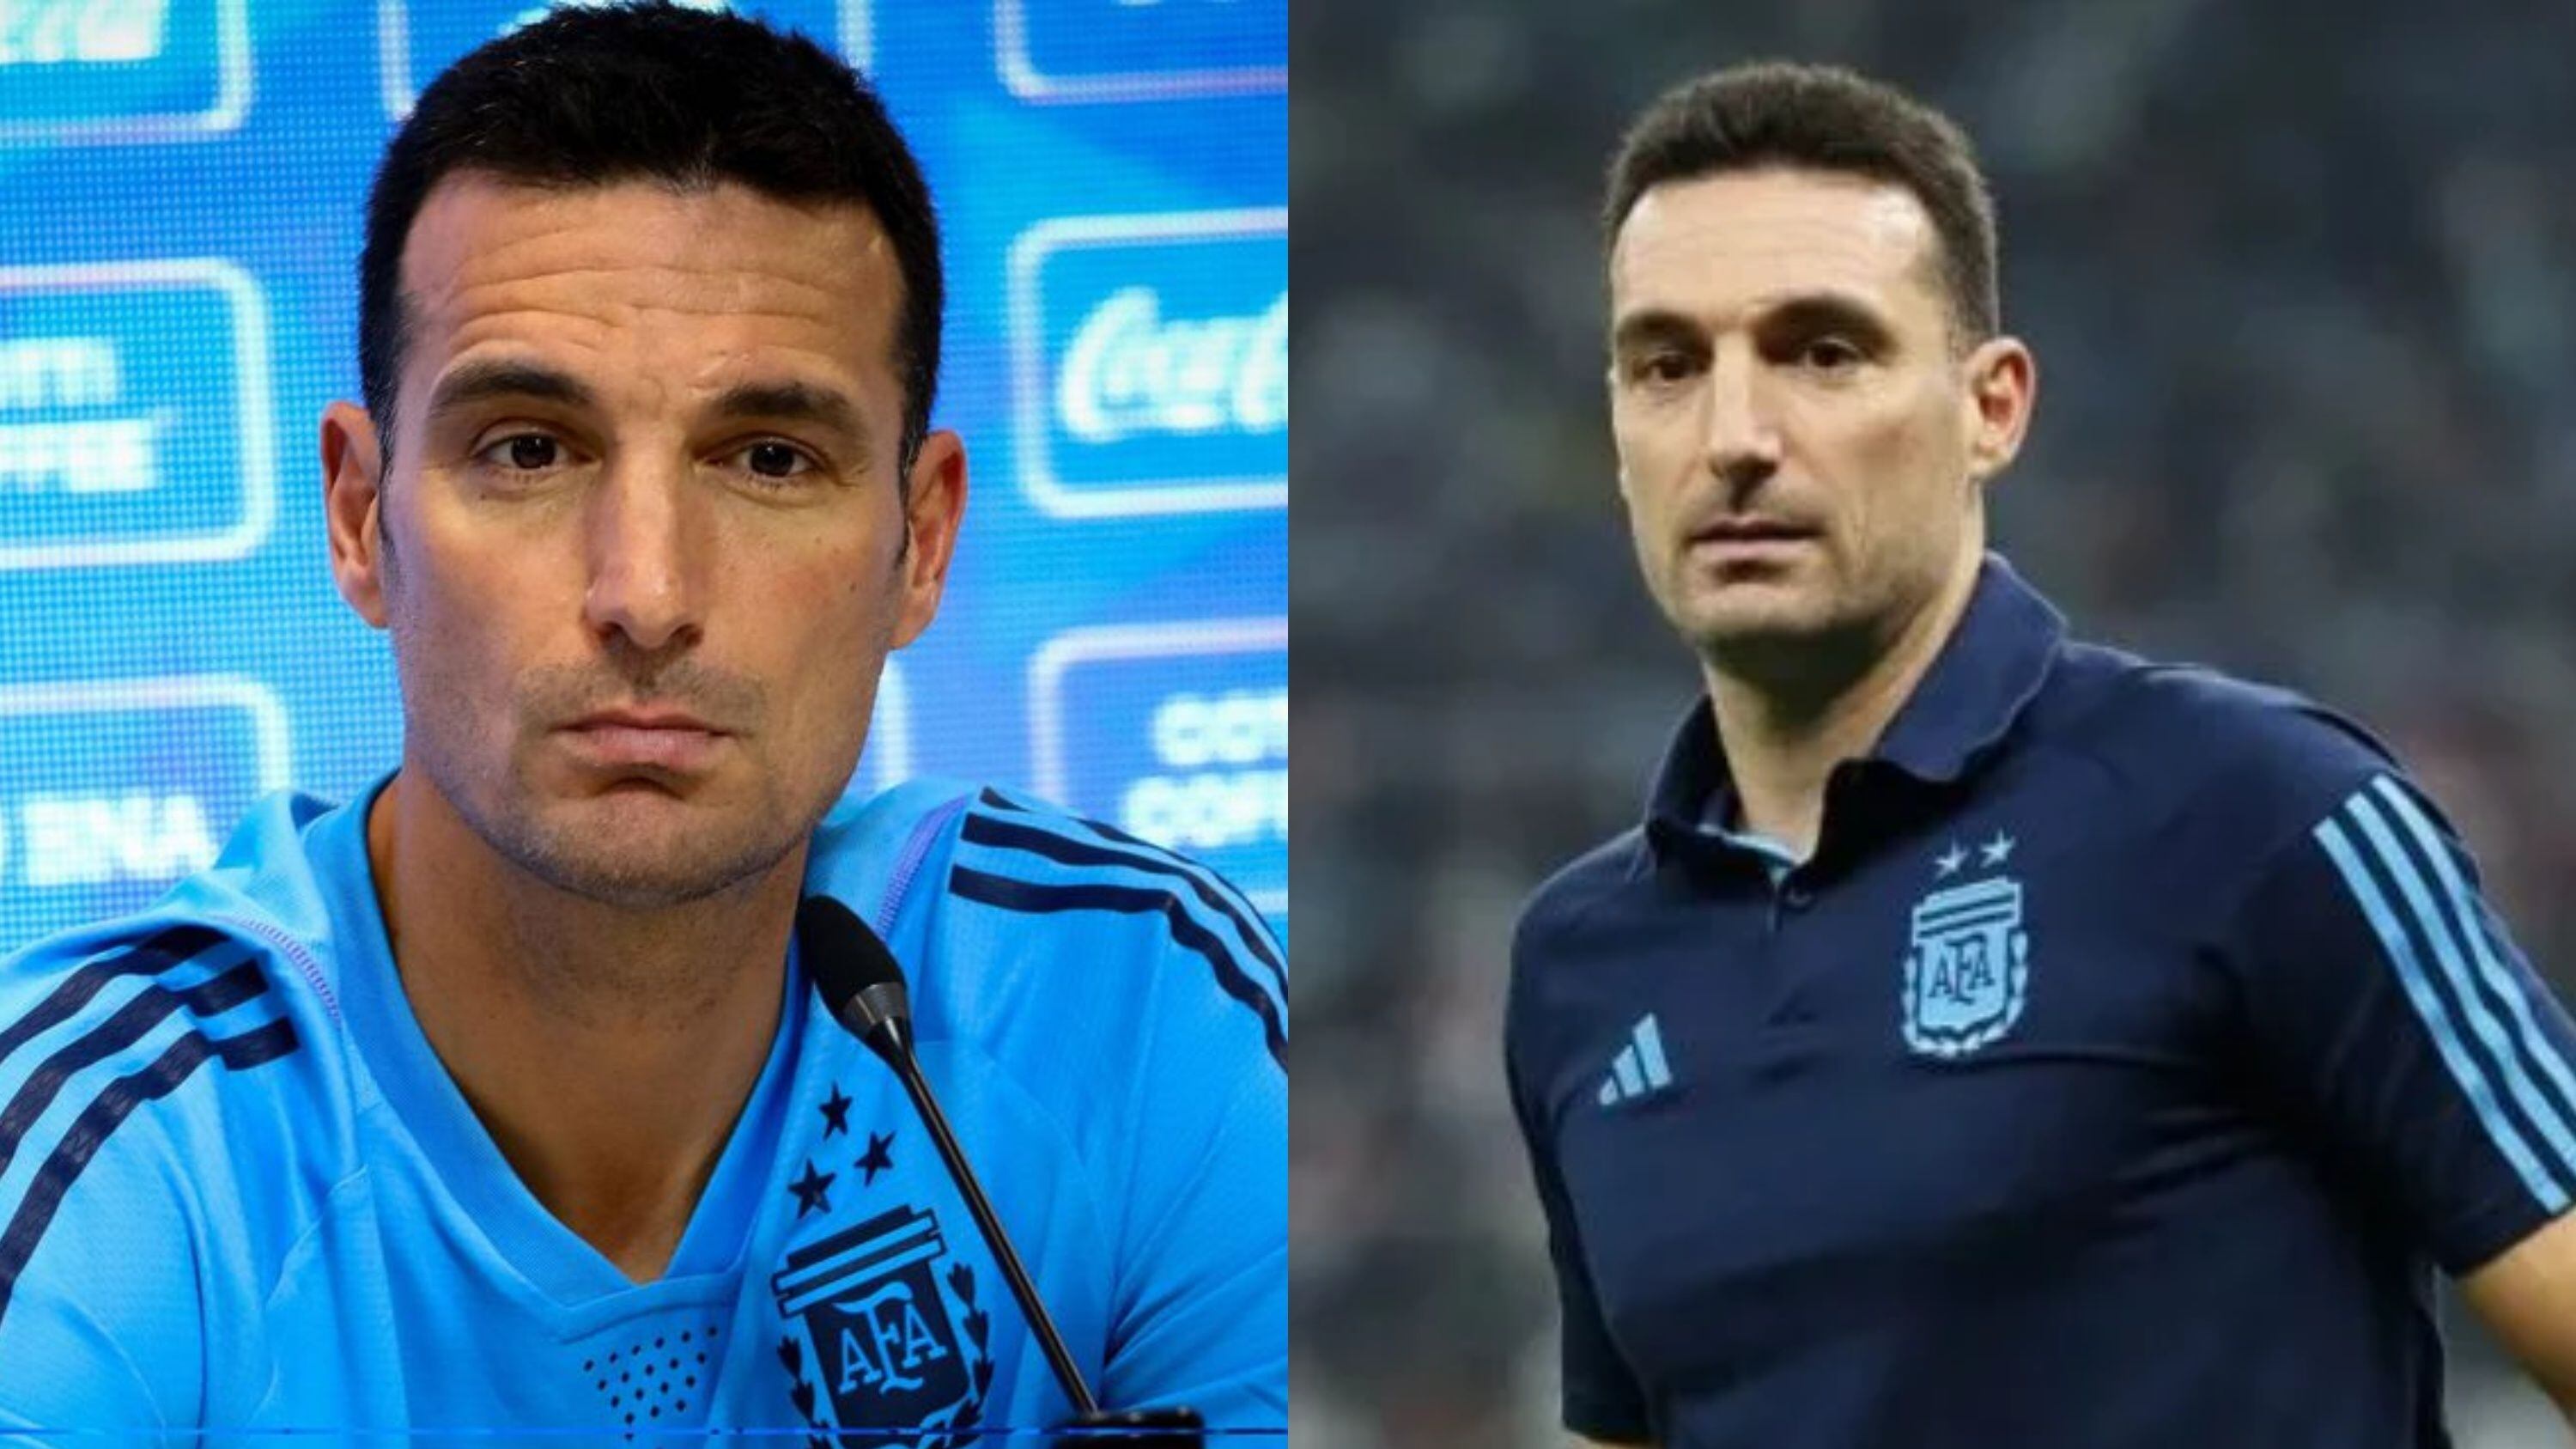 Scaloni's most recent message about leaving Argentina that paralyzes everyone